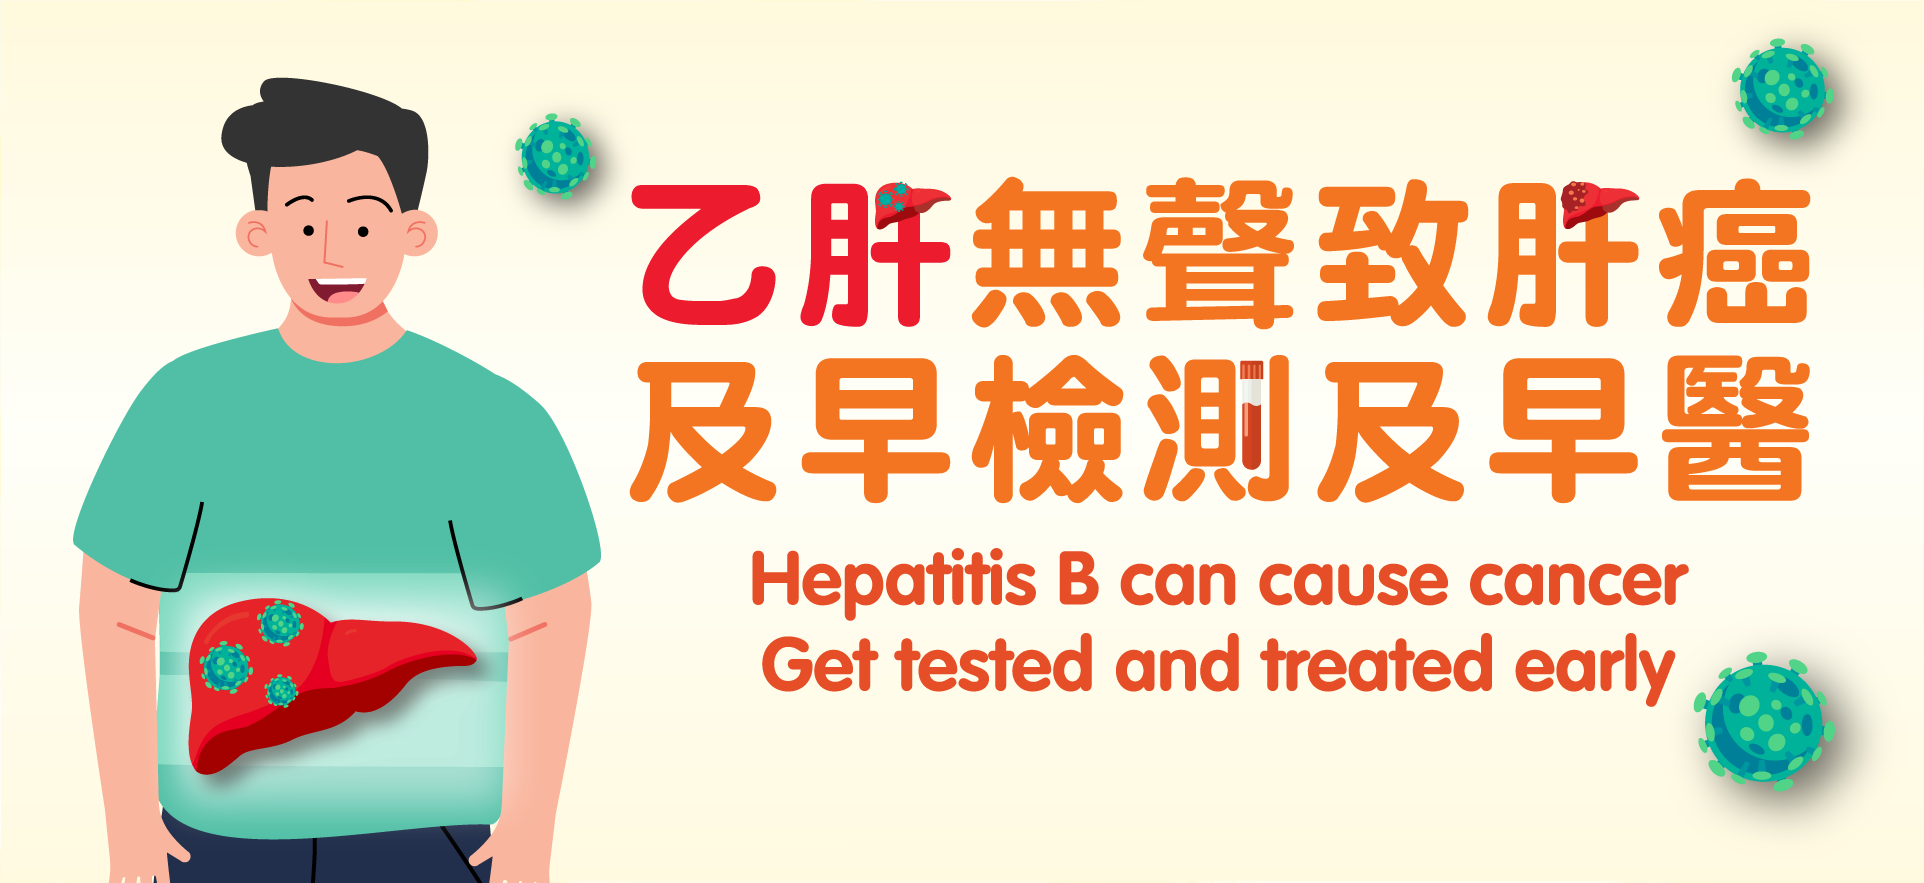 Video of 'Hepatitis B can cause cancer Get tested and treated early'